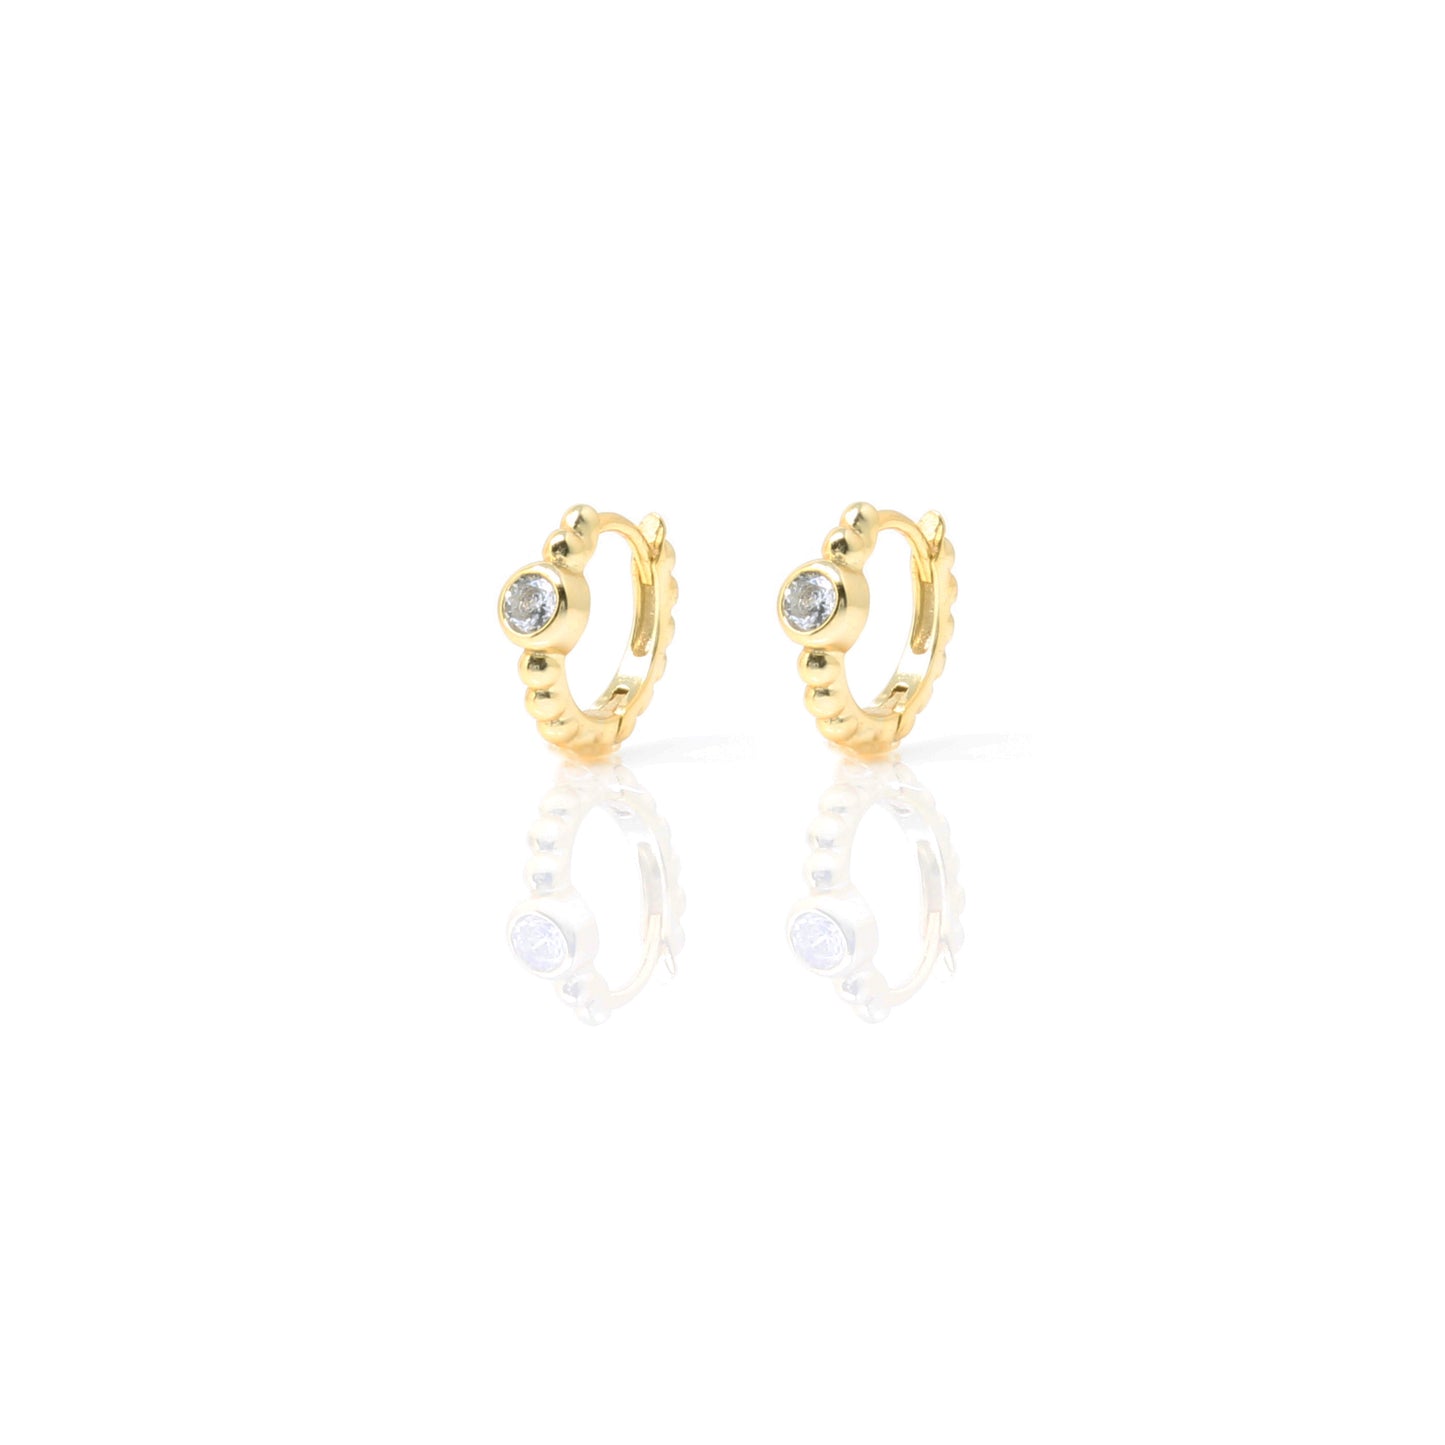 EF-5/G - Gold Huggies with Cubic Zirconia Center Stone